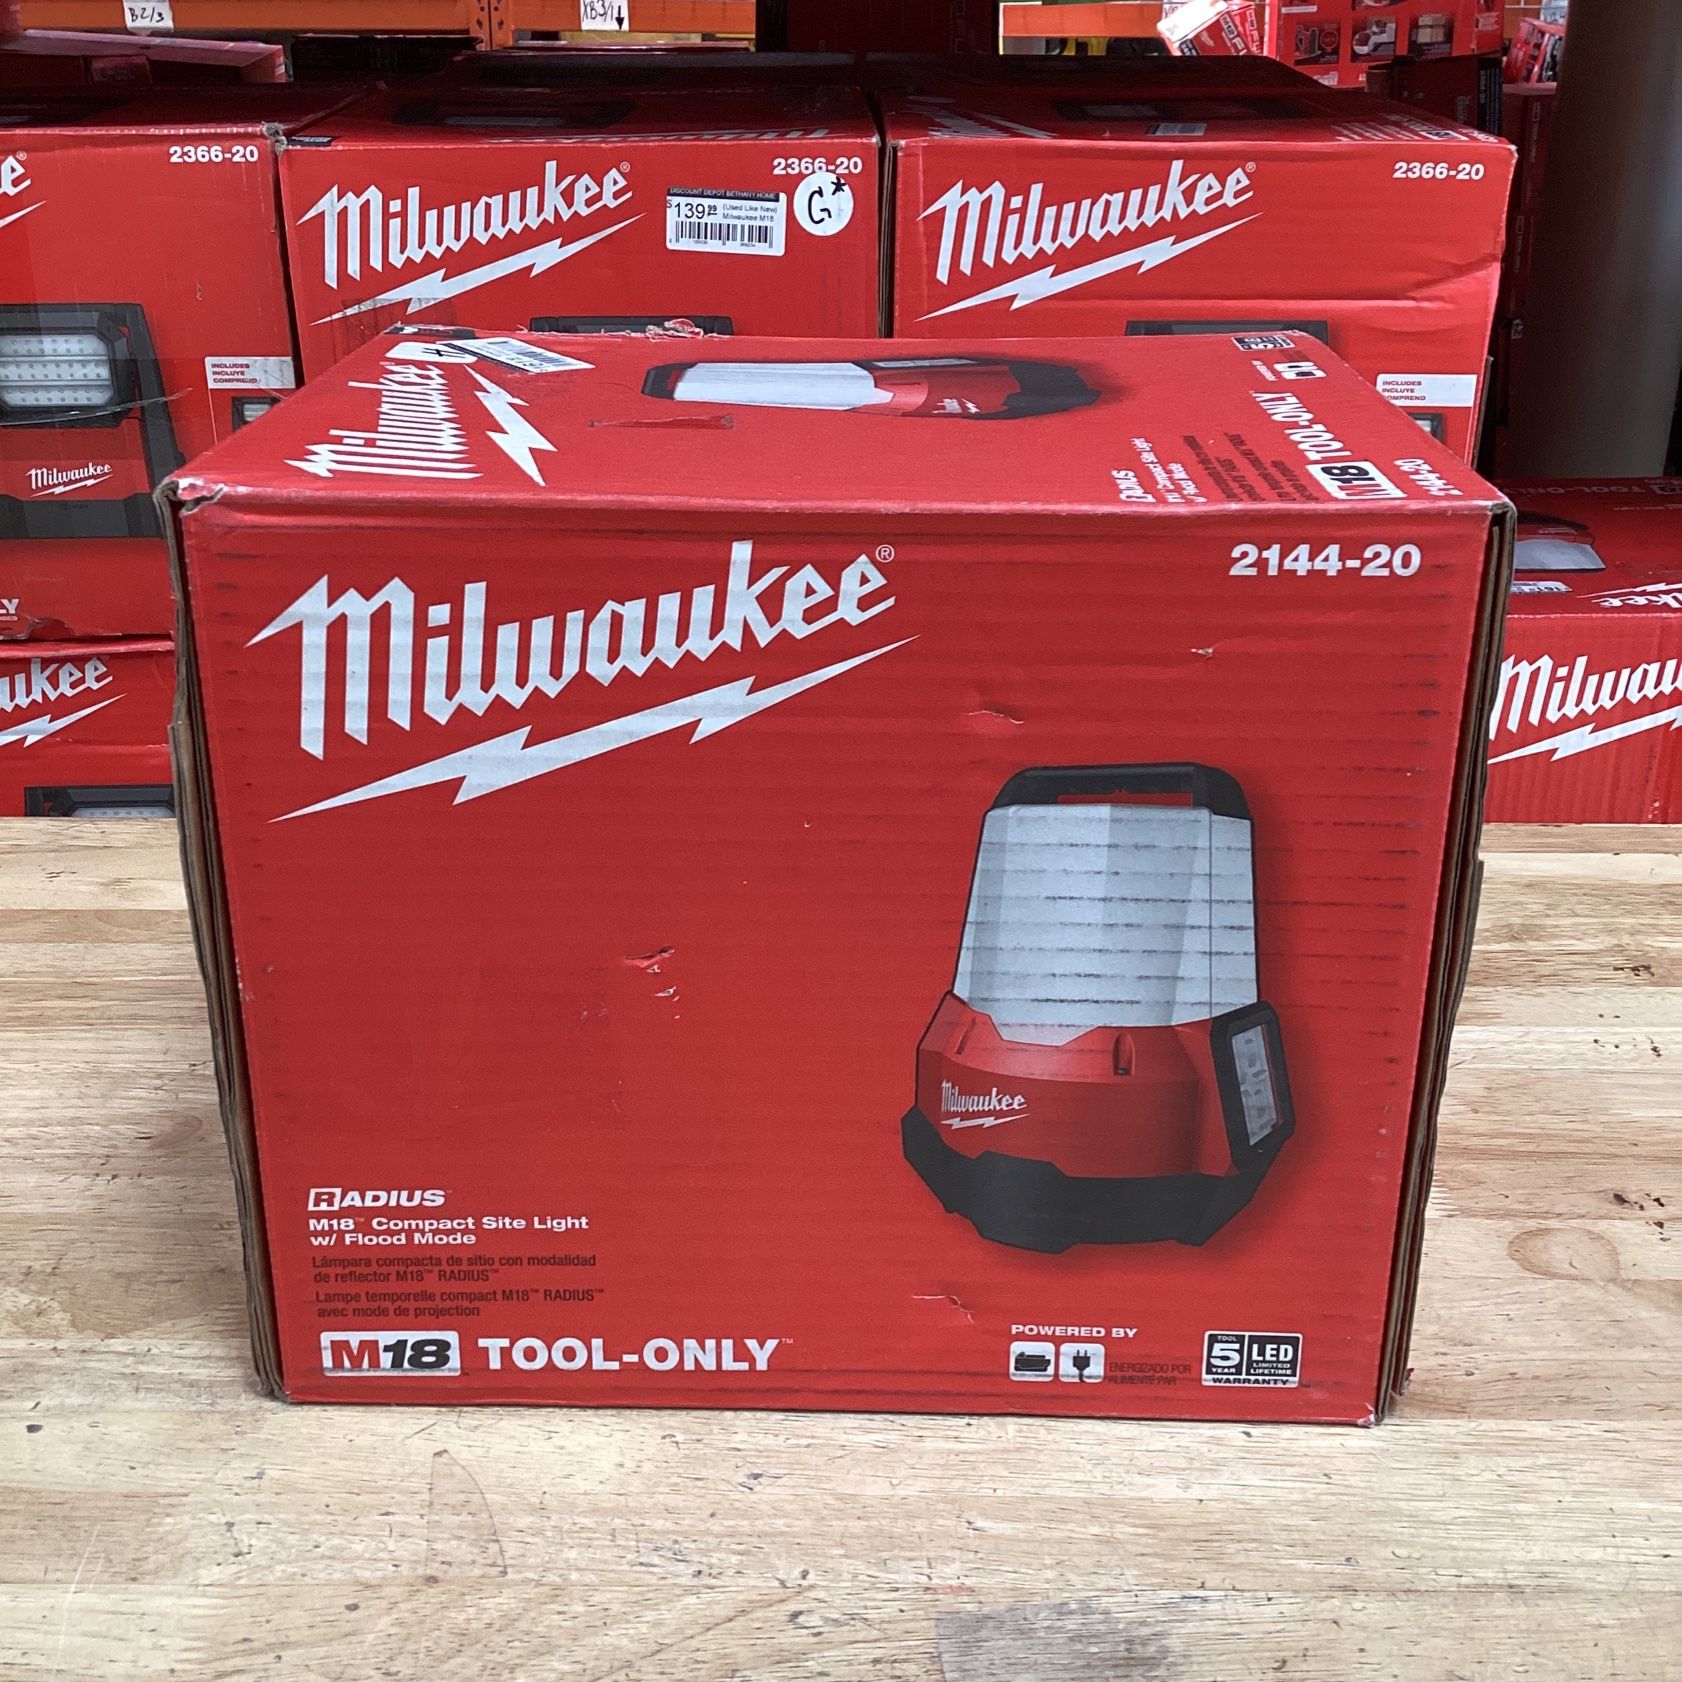 NEW) Milwaukee M18 18-Volt 2200 Lumens Cordless Radius LED Compact Site  Light with Flood Mode (Tool-Only) for Sale in Phoenix, AZ OfferUp